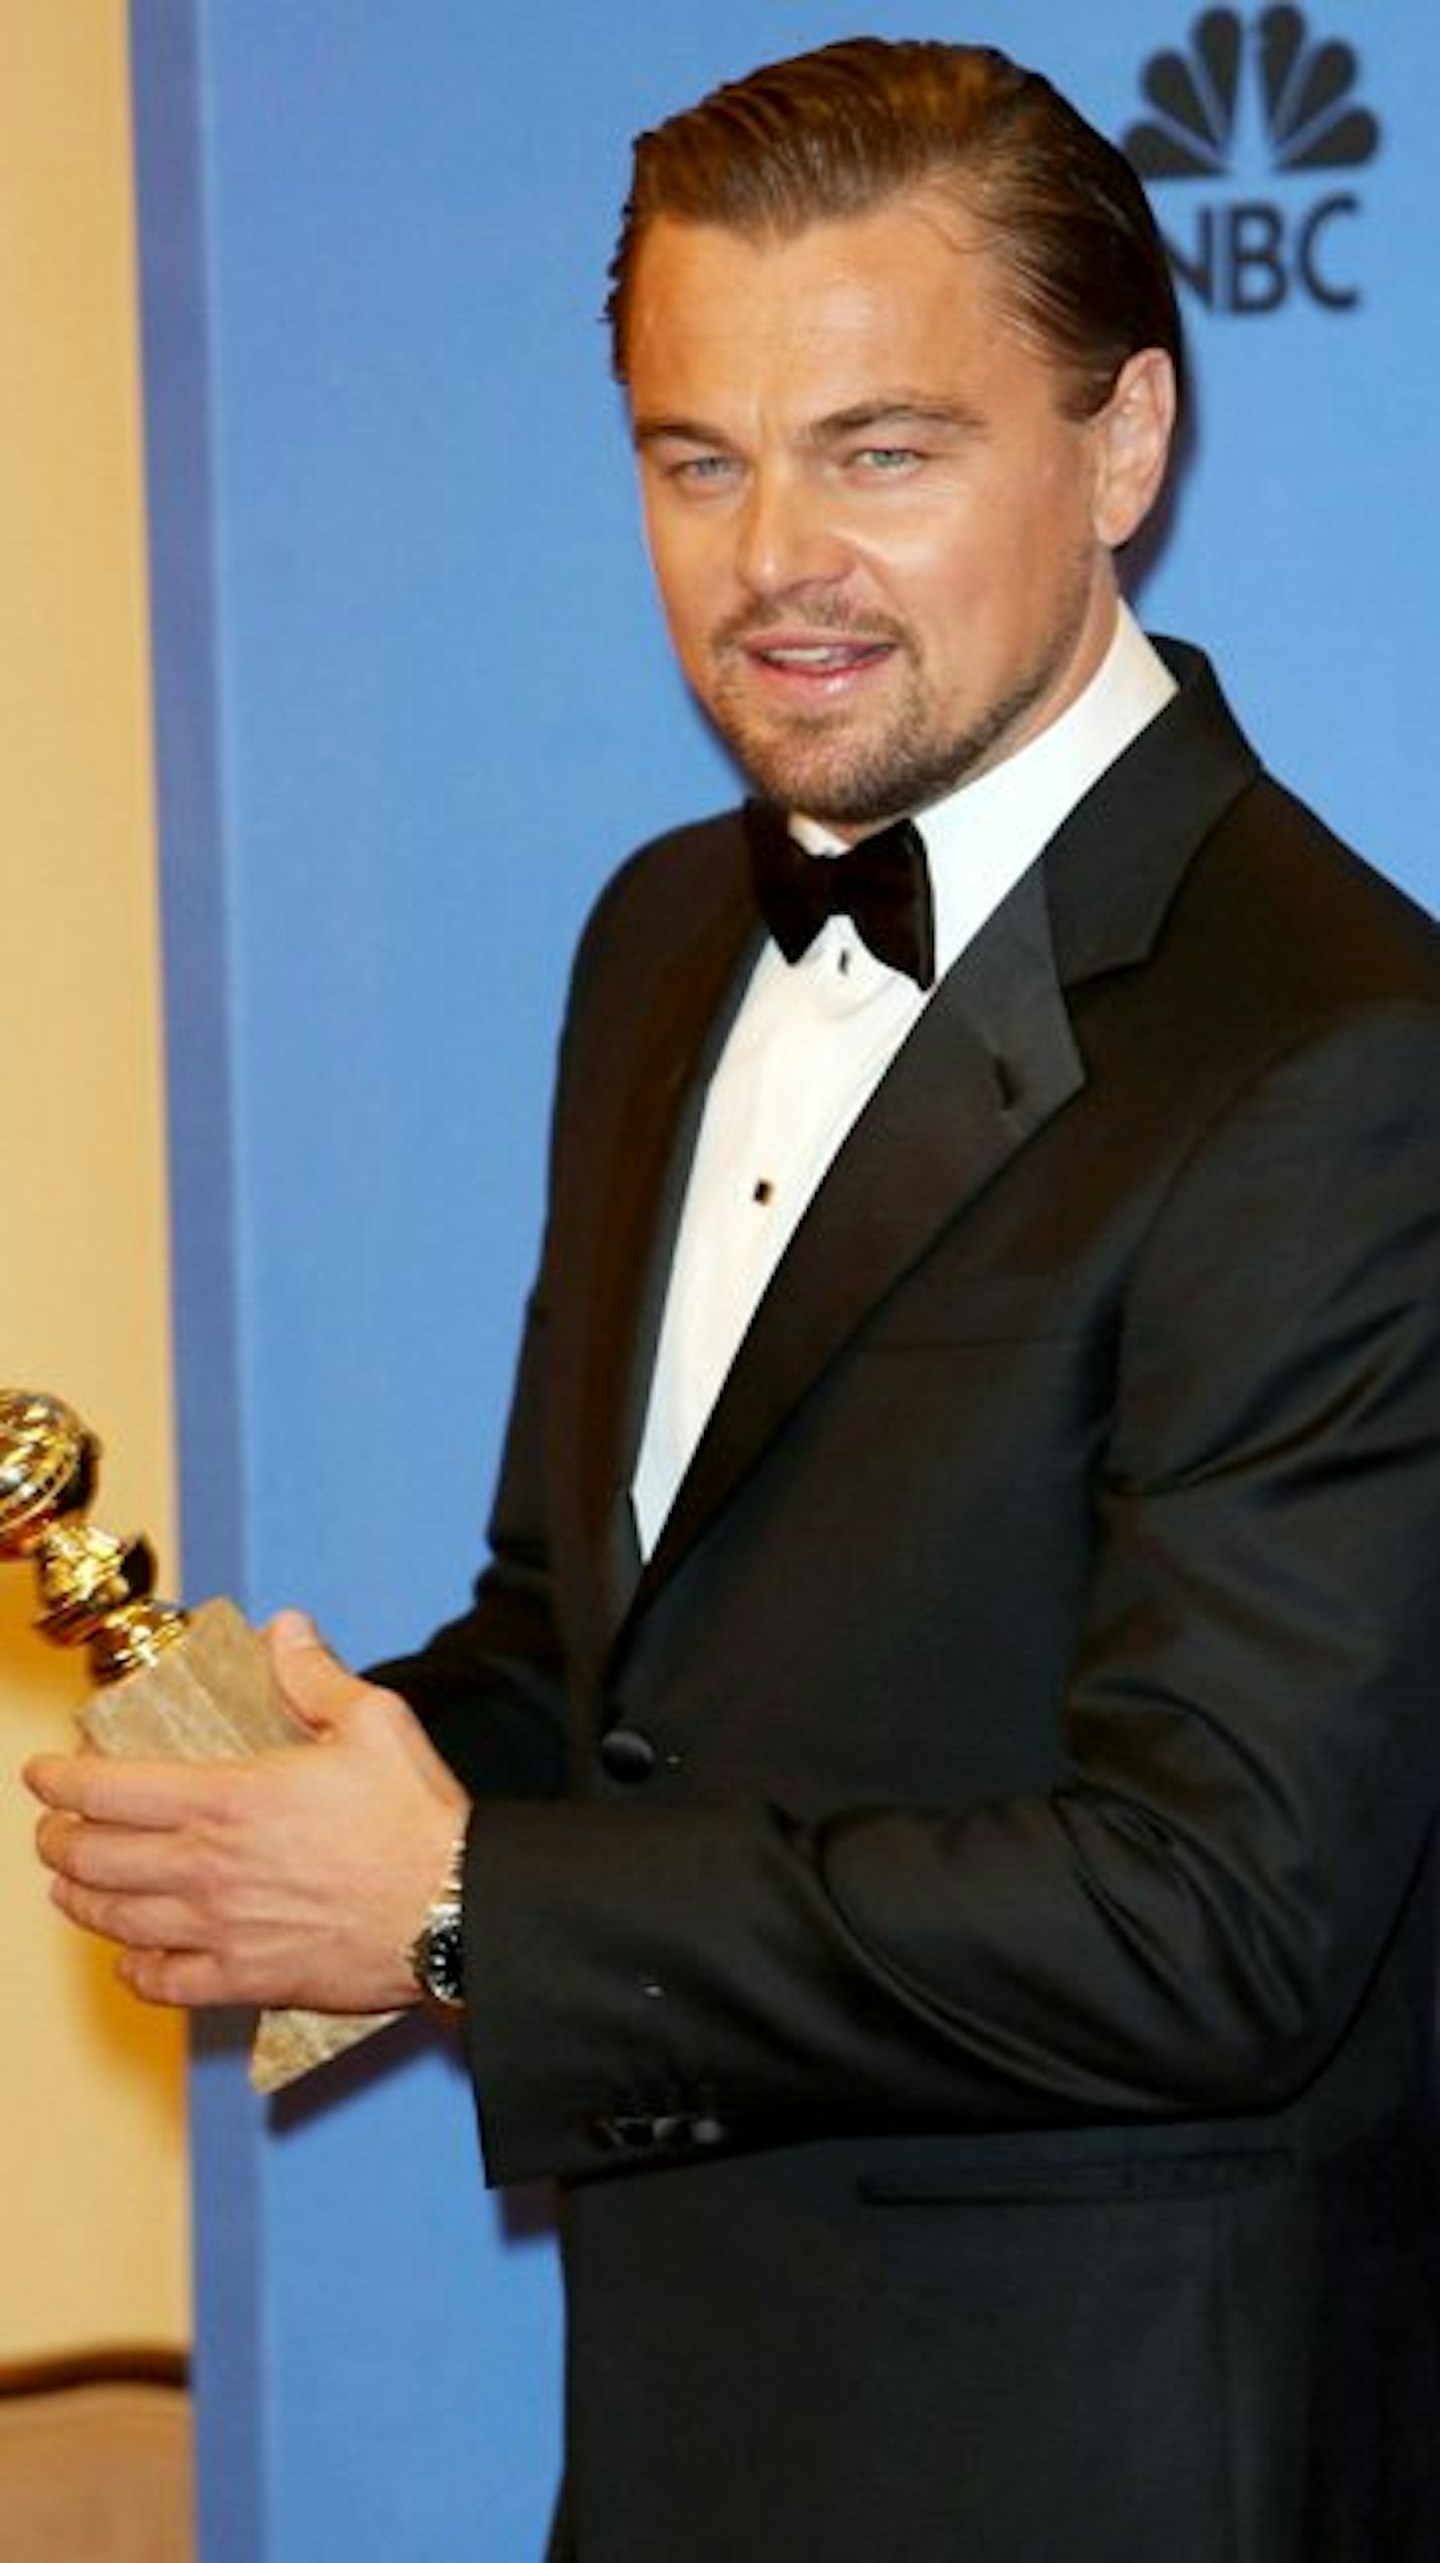 Leo receives his nomination following his Golden Globe win for The Wolf of Wall Street.